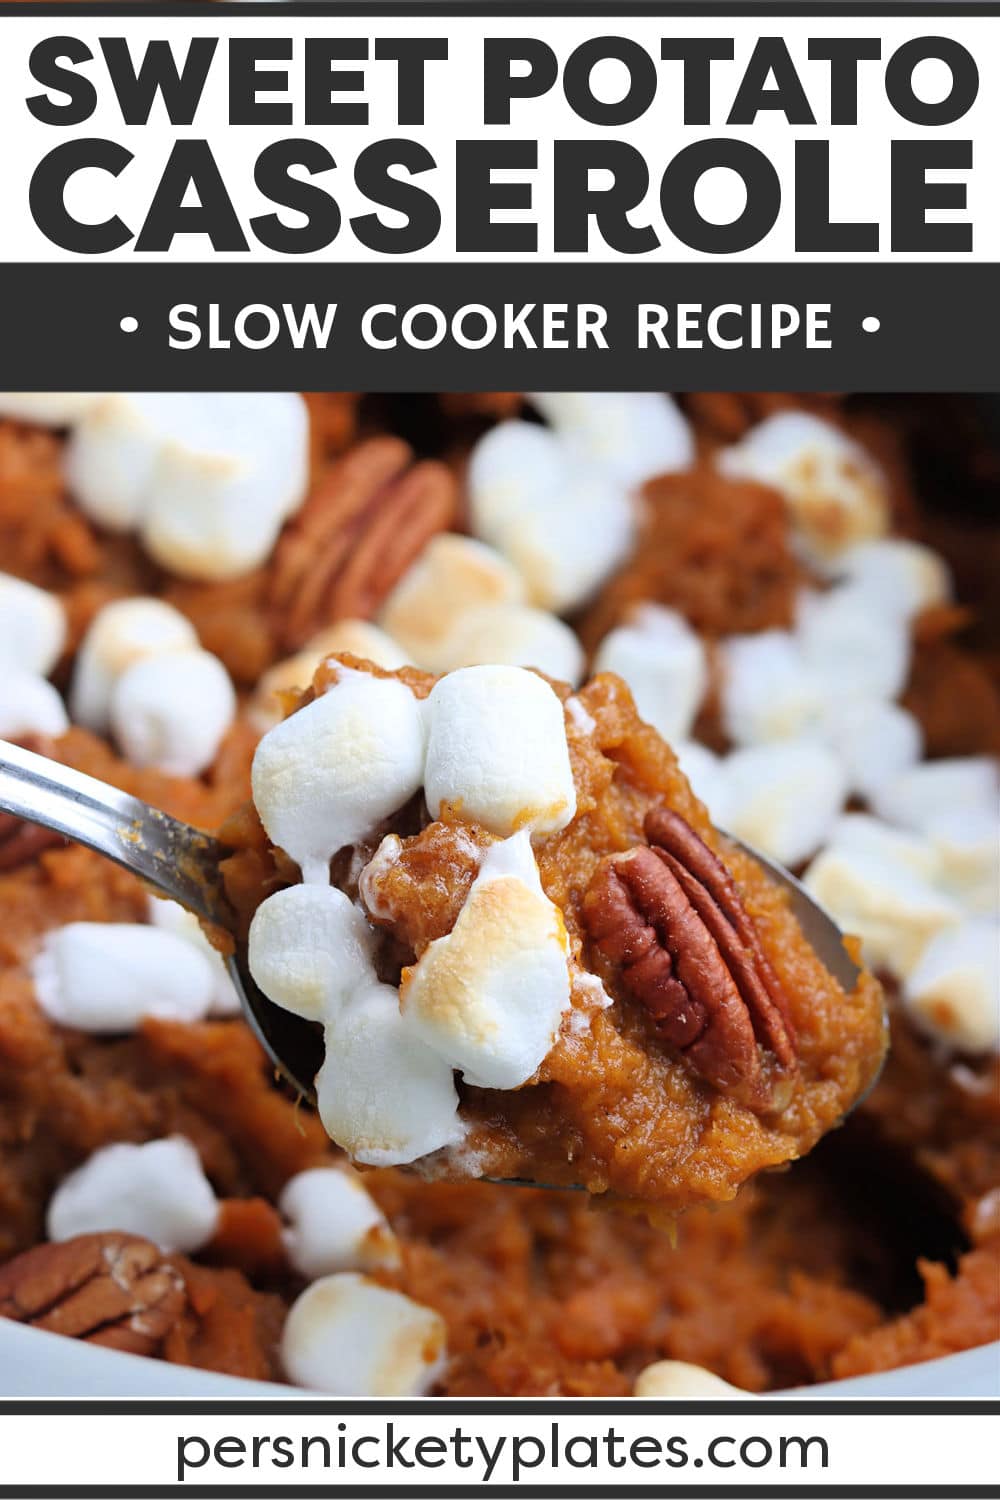 Free up oven space on holidays with this easy Slow Cooker Sweet Potato Casserole. Creamy sweet potatoes topped with a gooey marshmallow topping and pecans made right in the crockpot! | www.persnicketyplates.com